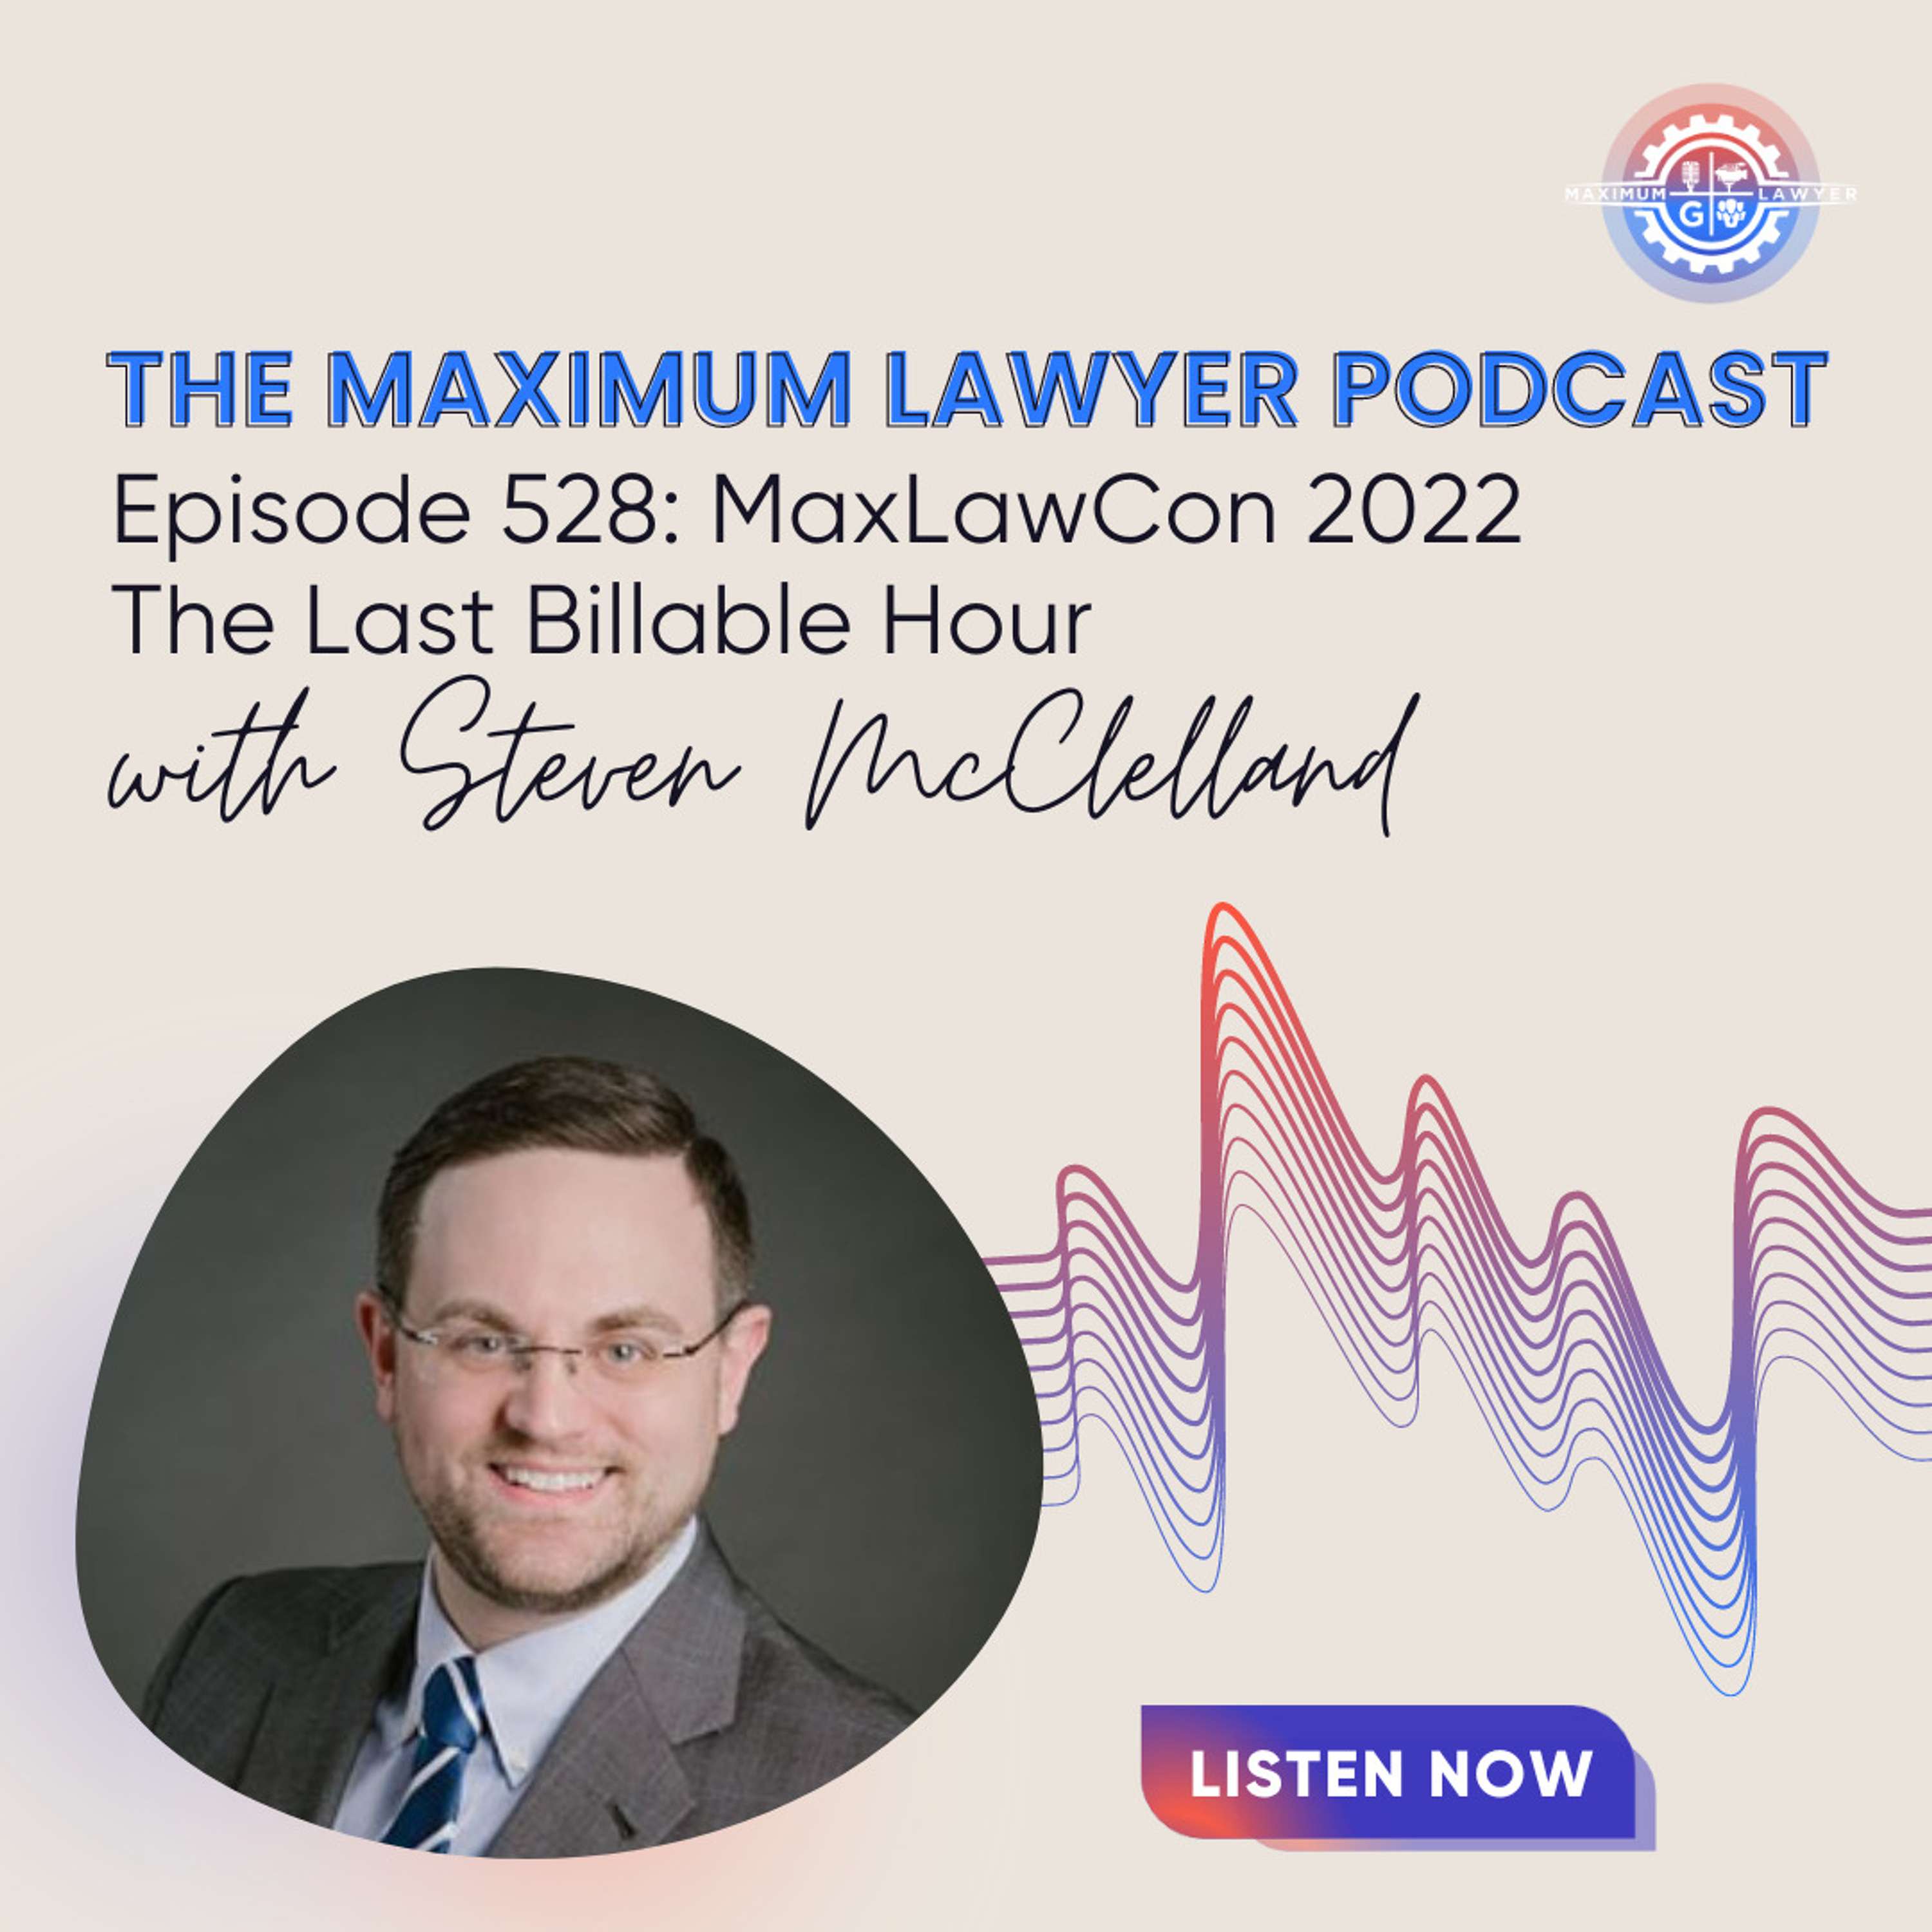 The Last Billable Hour with Steven McClelland